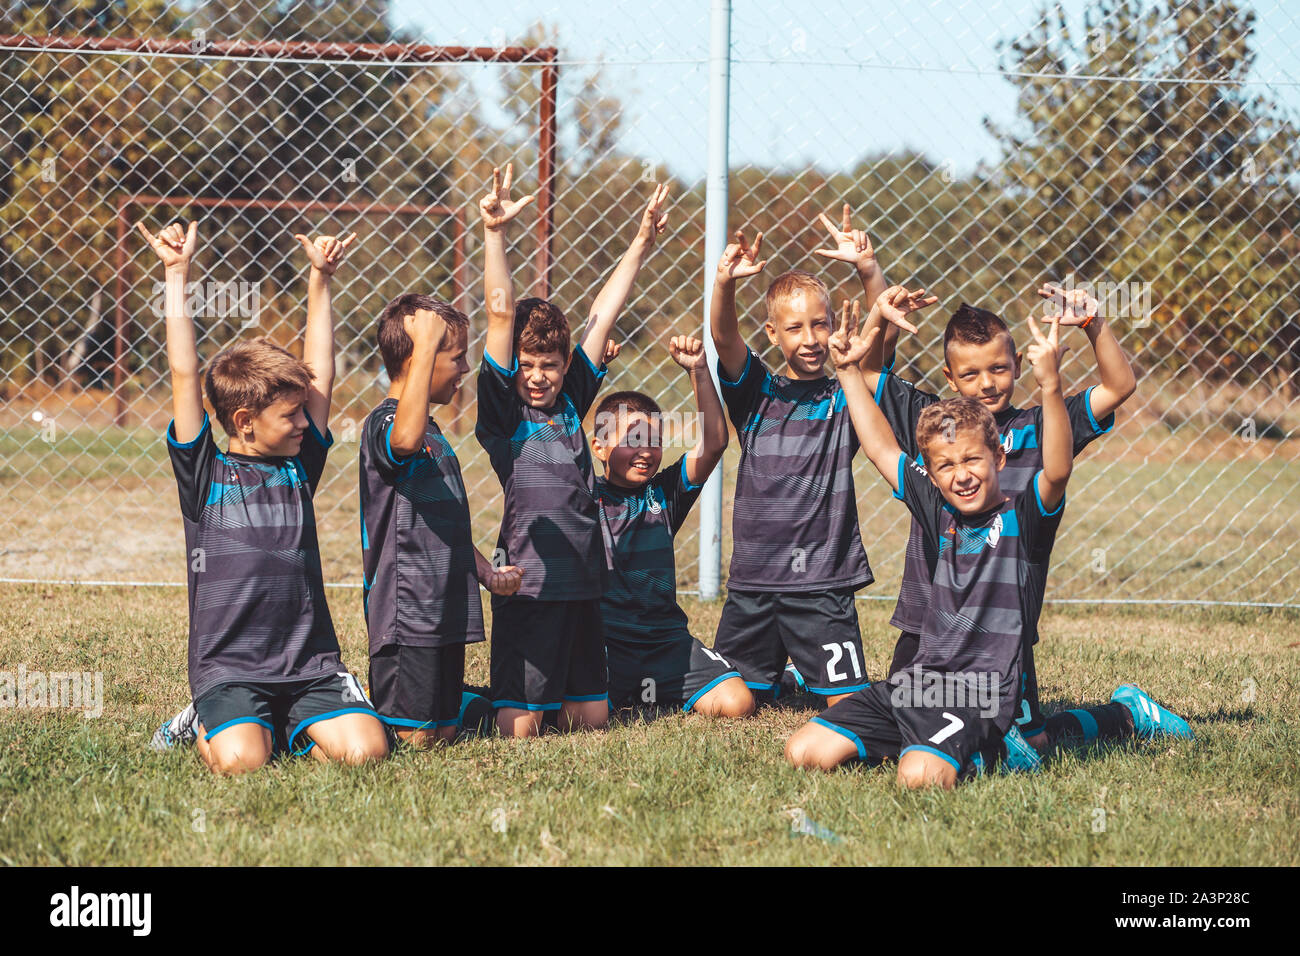 Kids soccer football - young children players celebrating with their hands up, after victory. Stock Photo